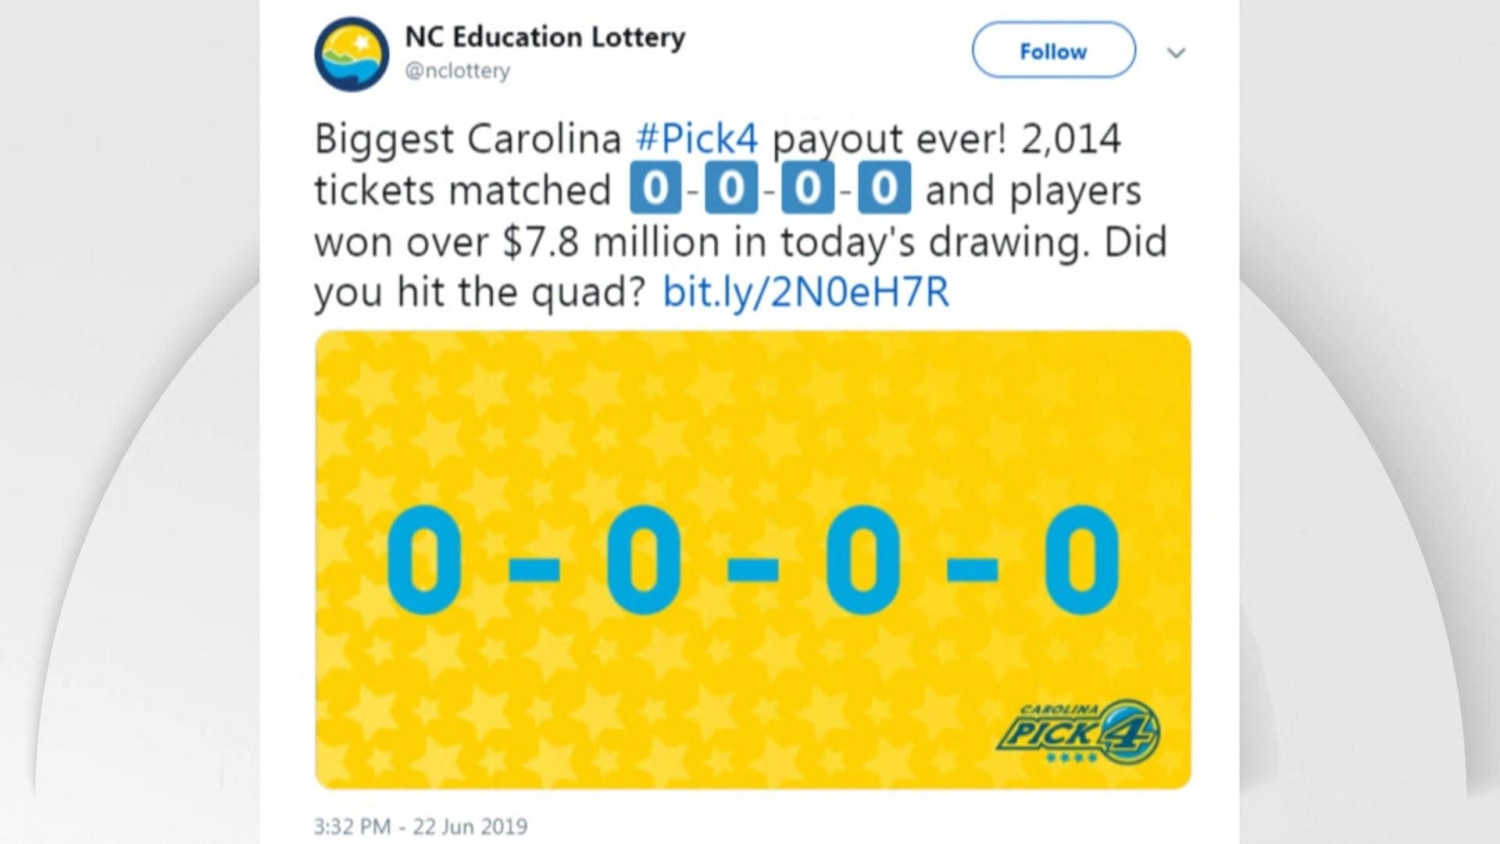 More than 2,000 people win North Carolina lottery by picking '0-0-0-0